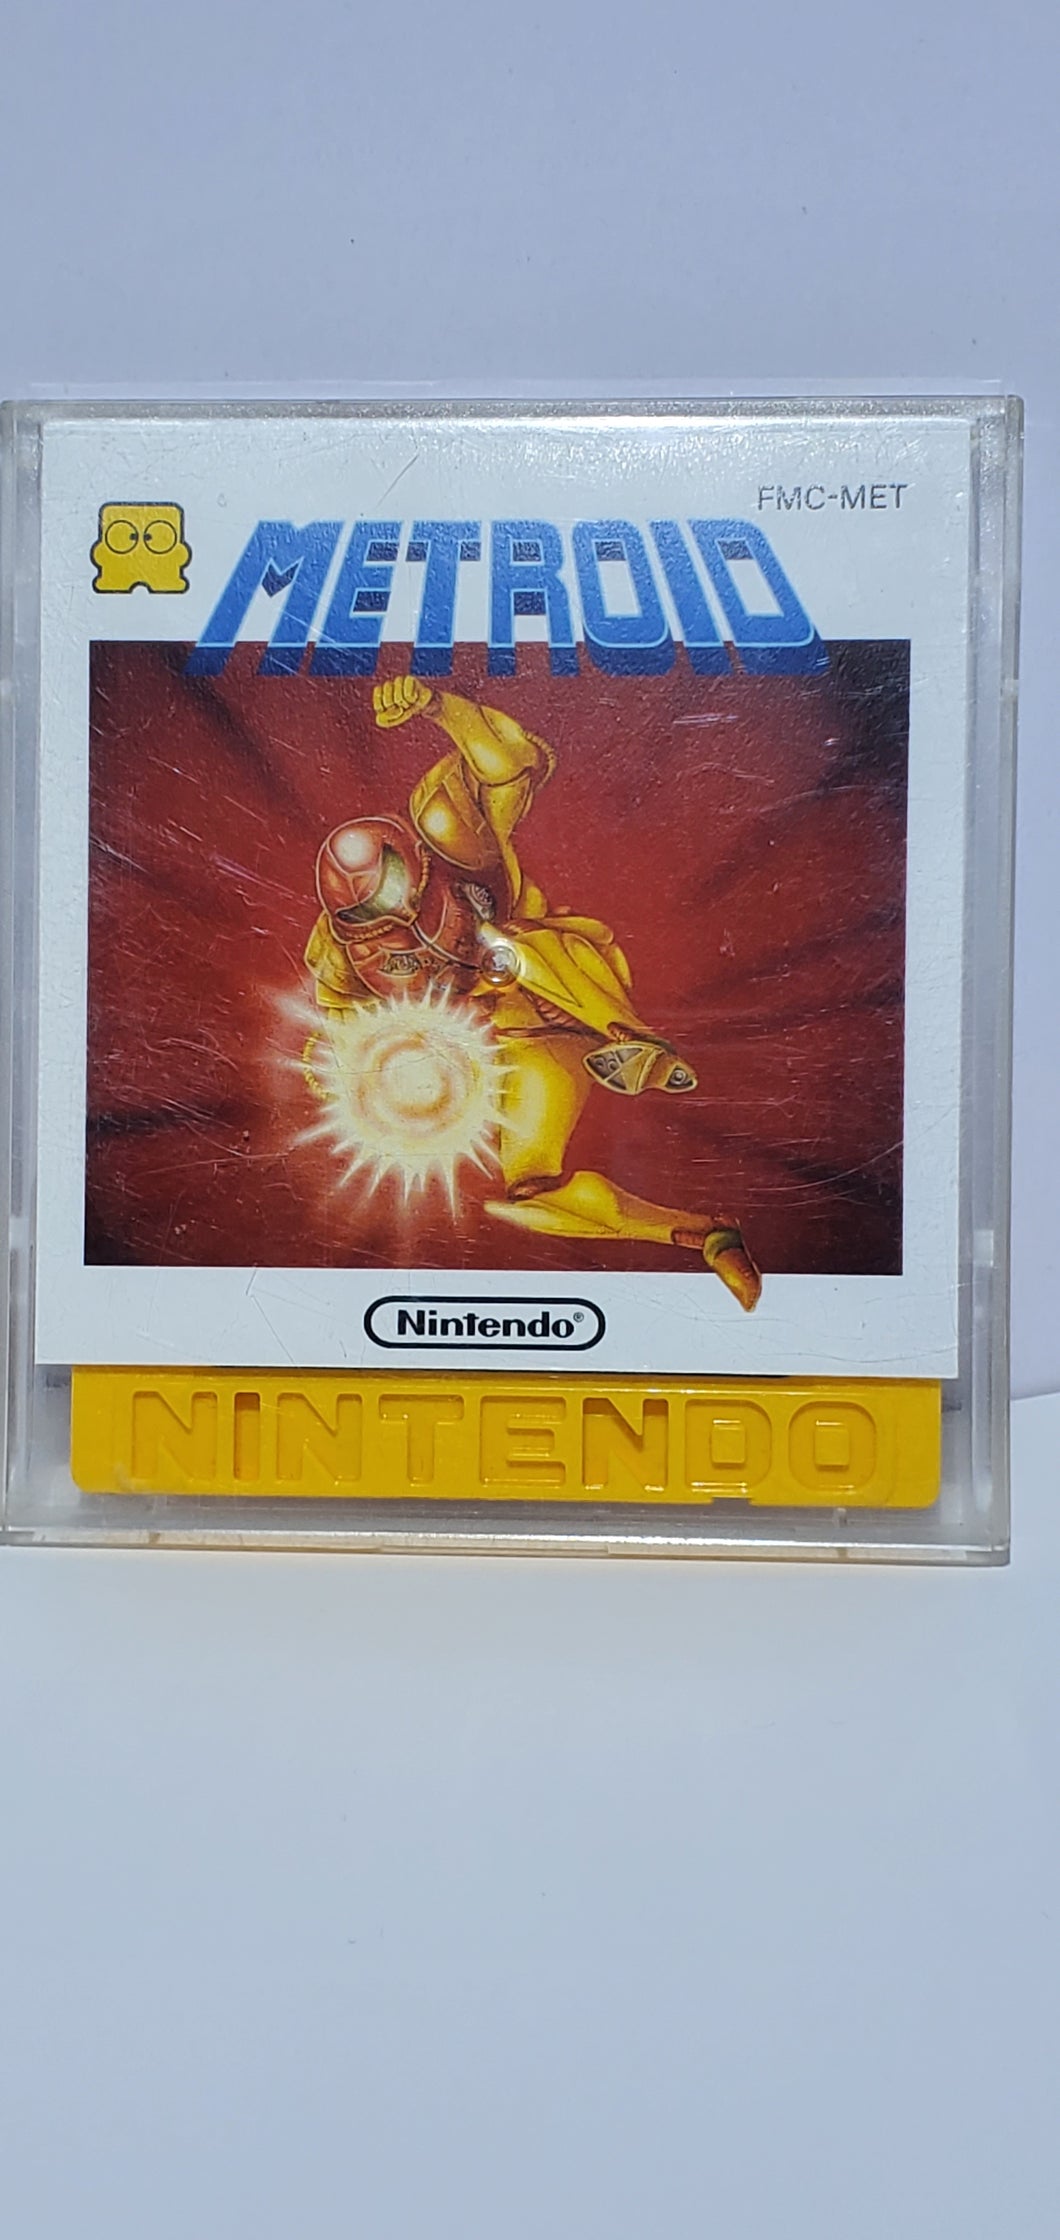 Metroid Famicom Disc System replacement cover slip (no game included)